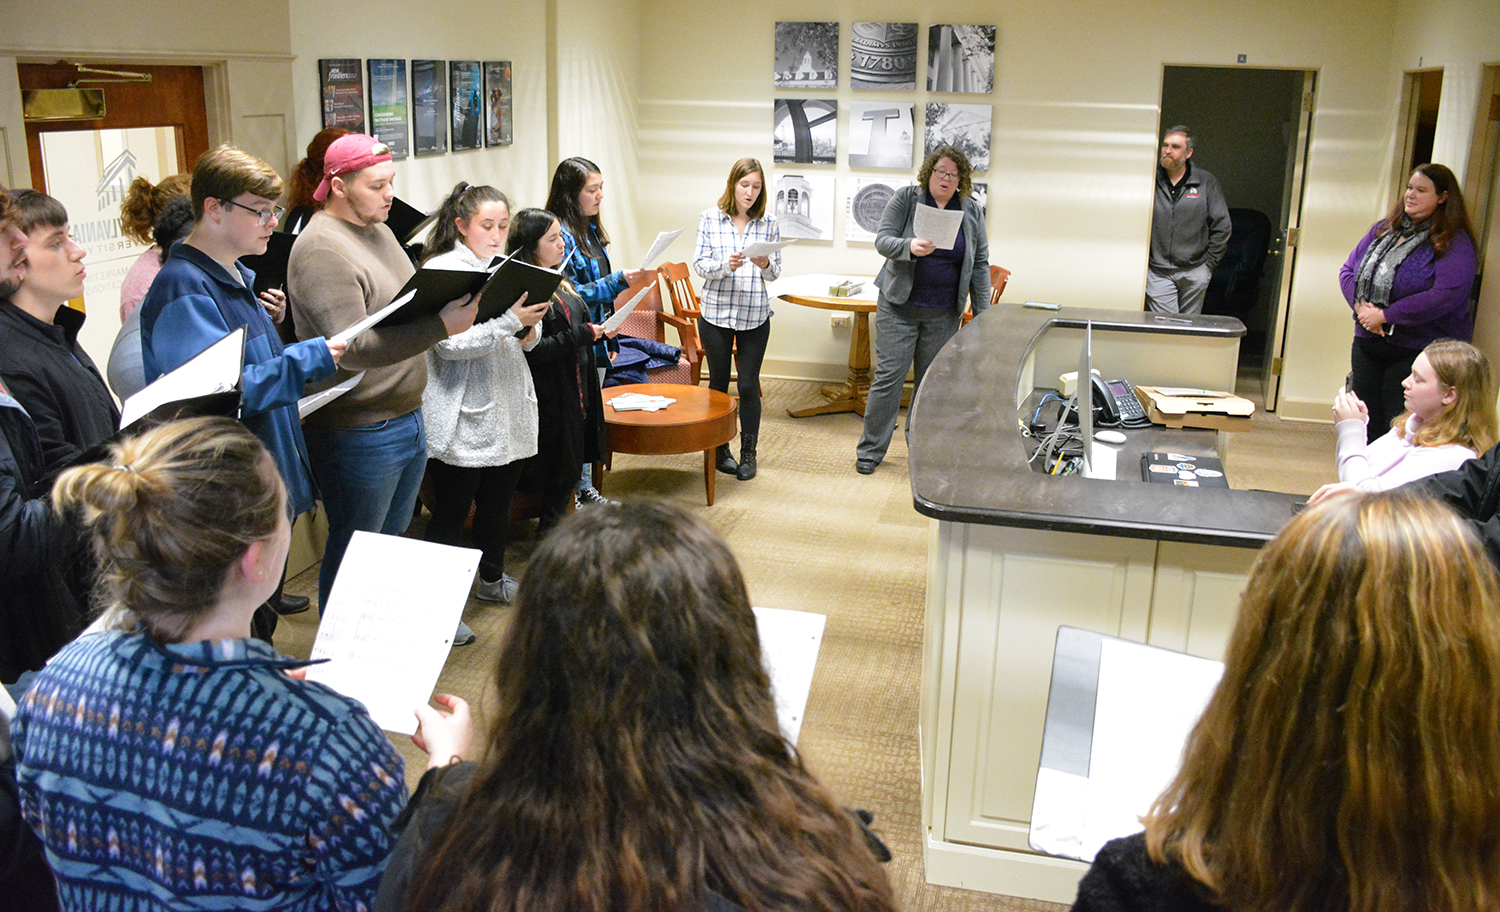 Transylvania Choir spreading holiday cheer on and off campus